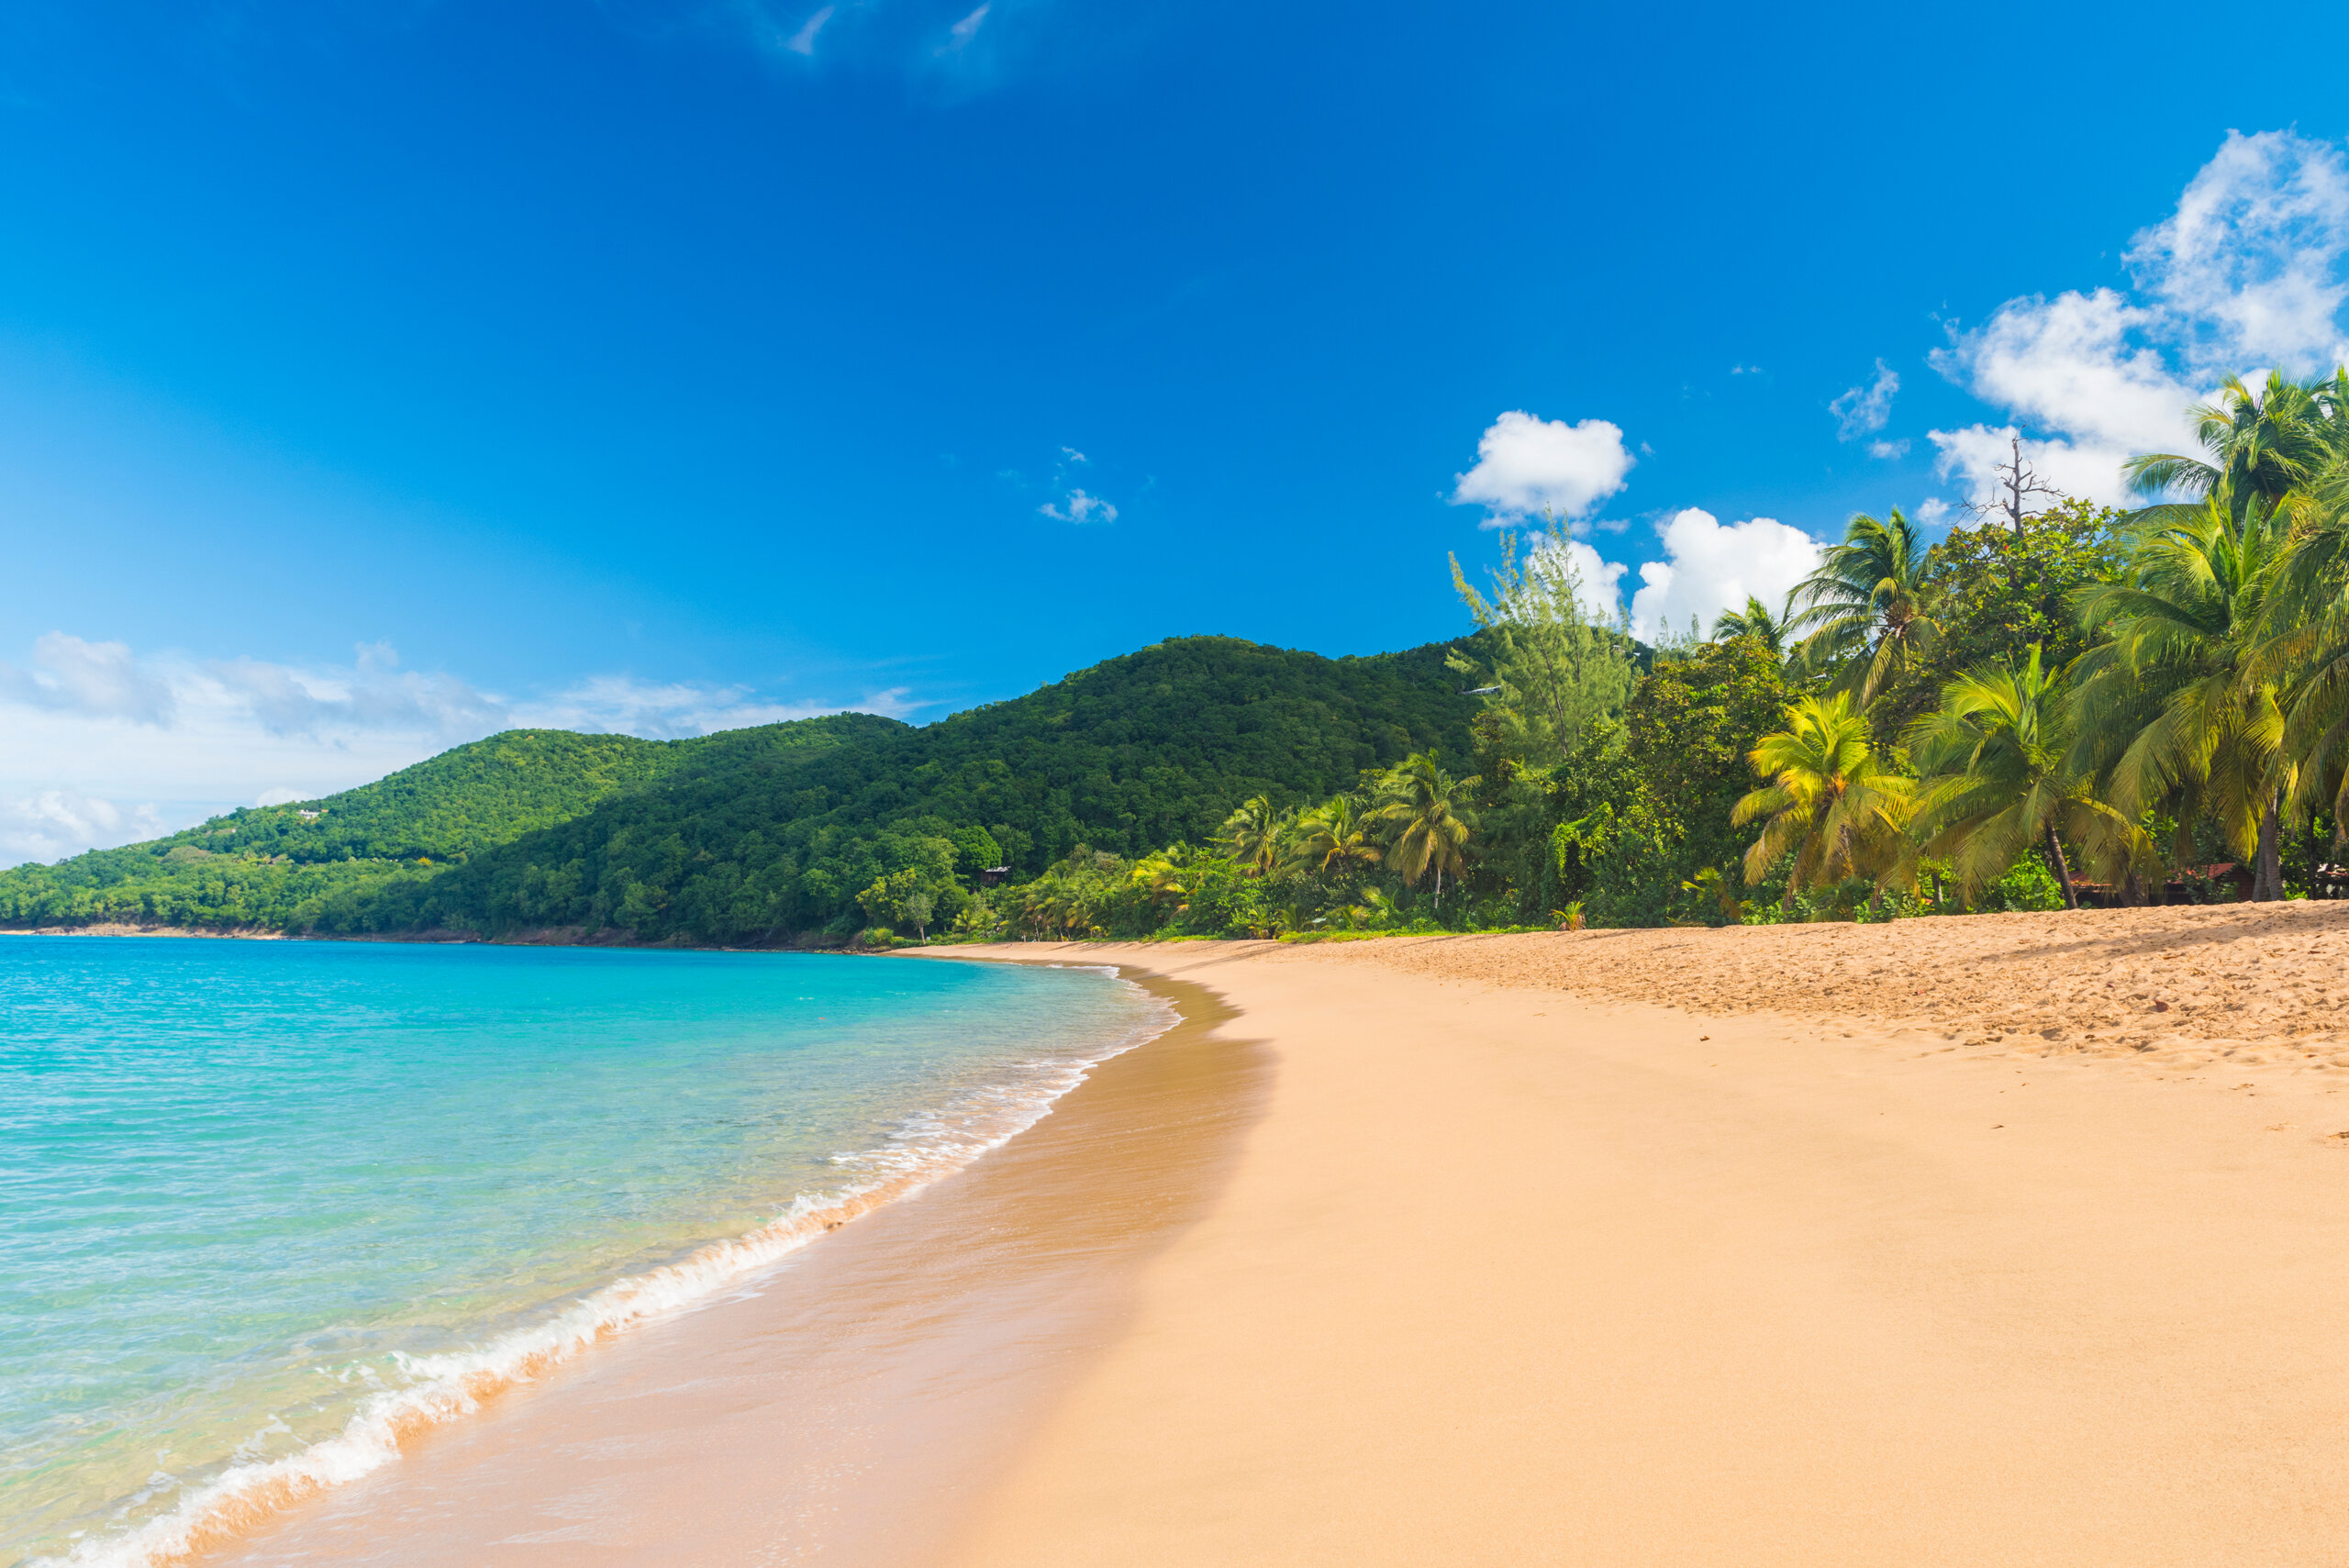 Great beach of Grand Anse near village of Deshaies, Guadeloupe, Caribbean